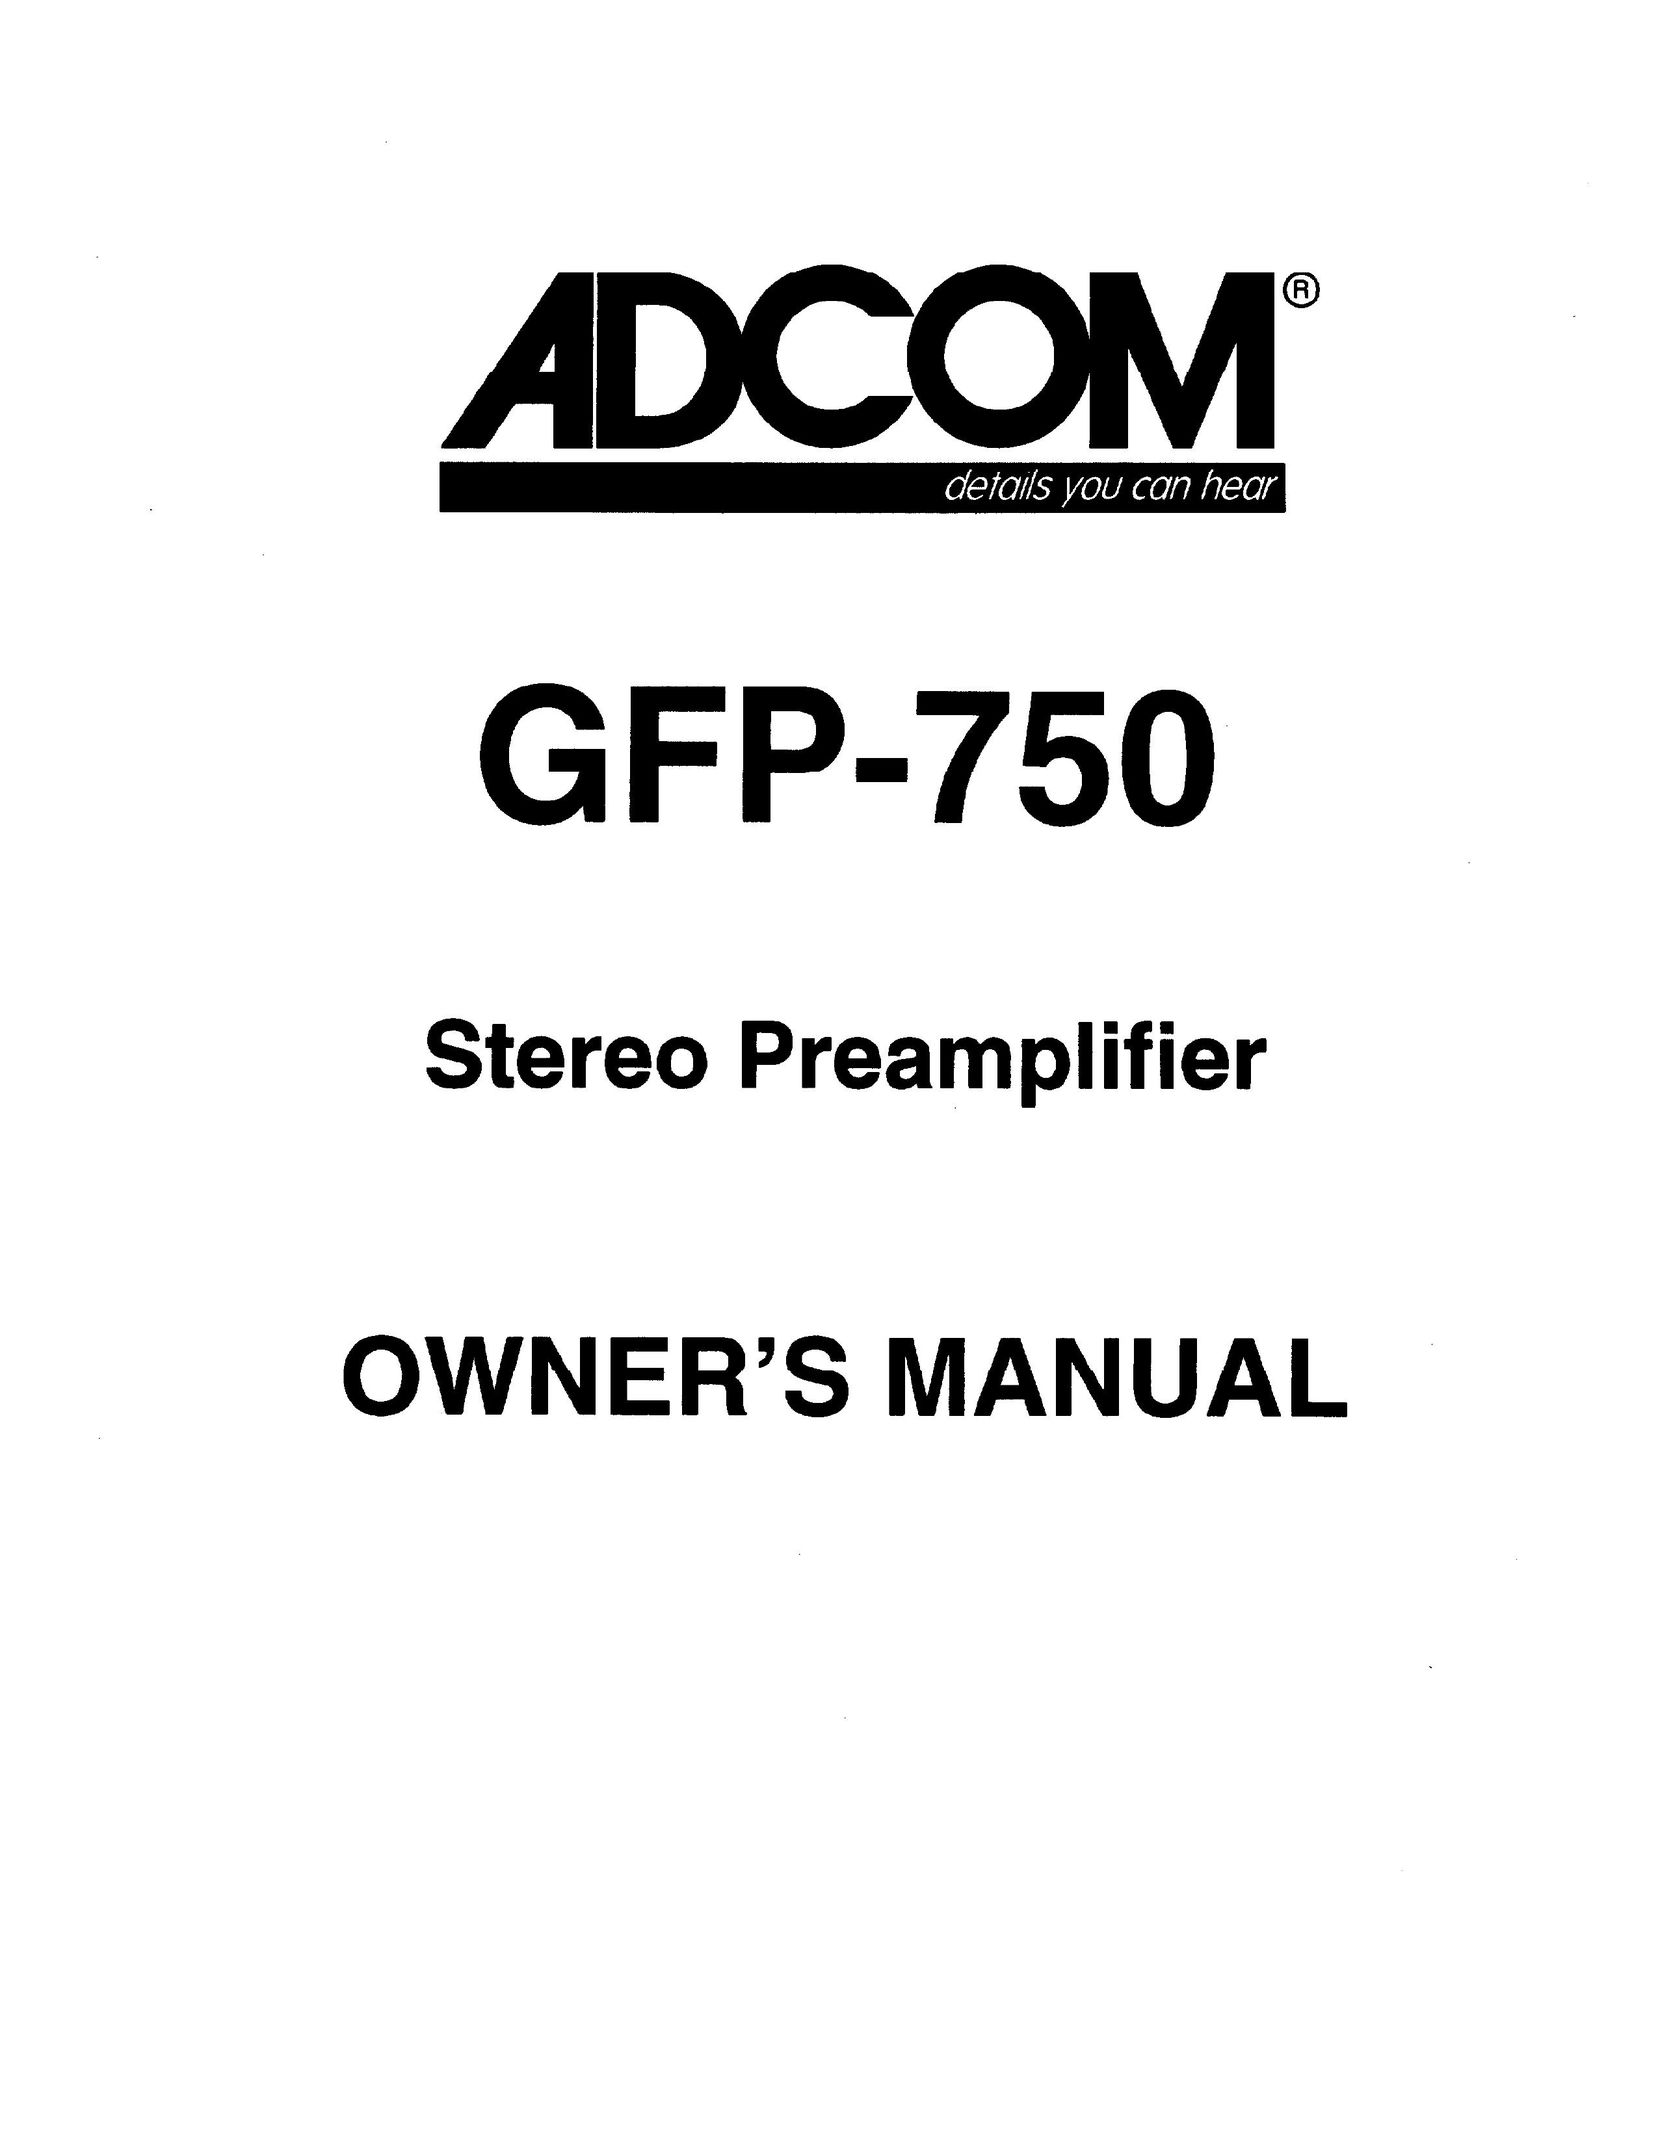 Adcom GFP-750 Stereo Amplifier User Manual